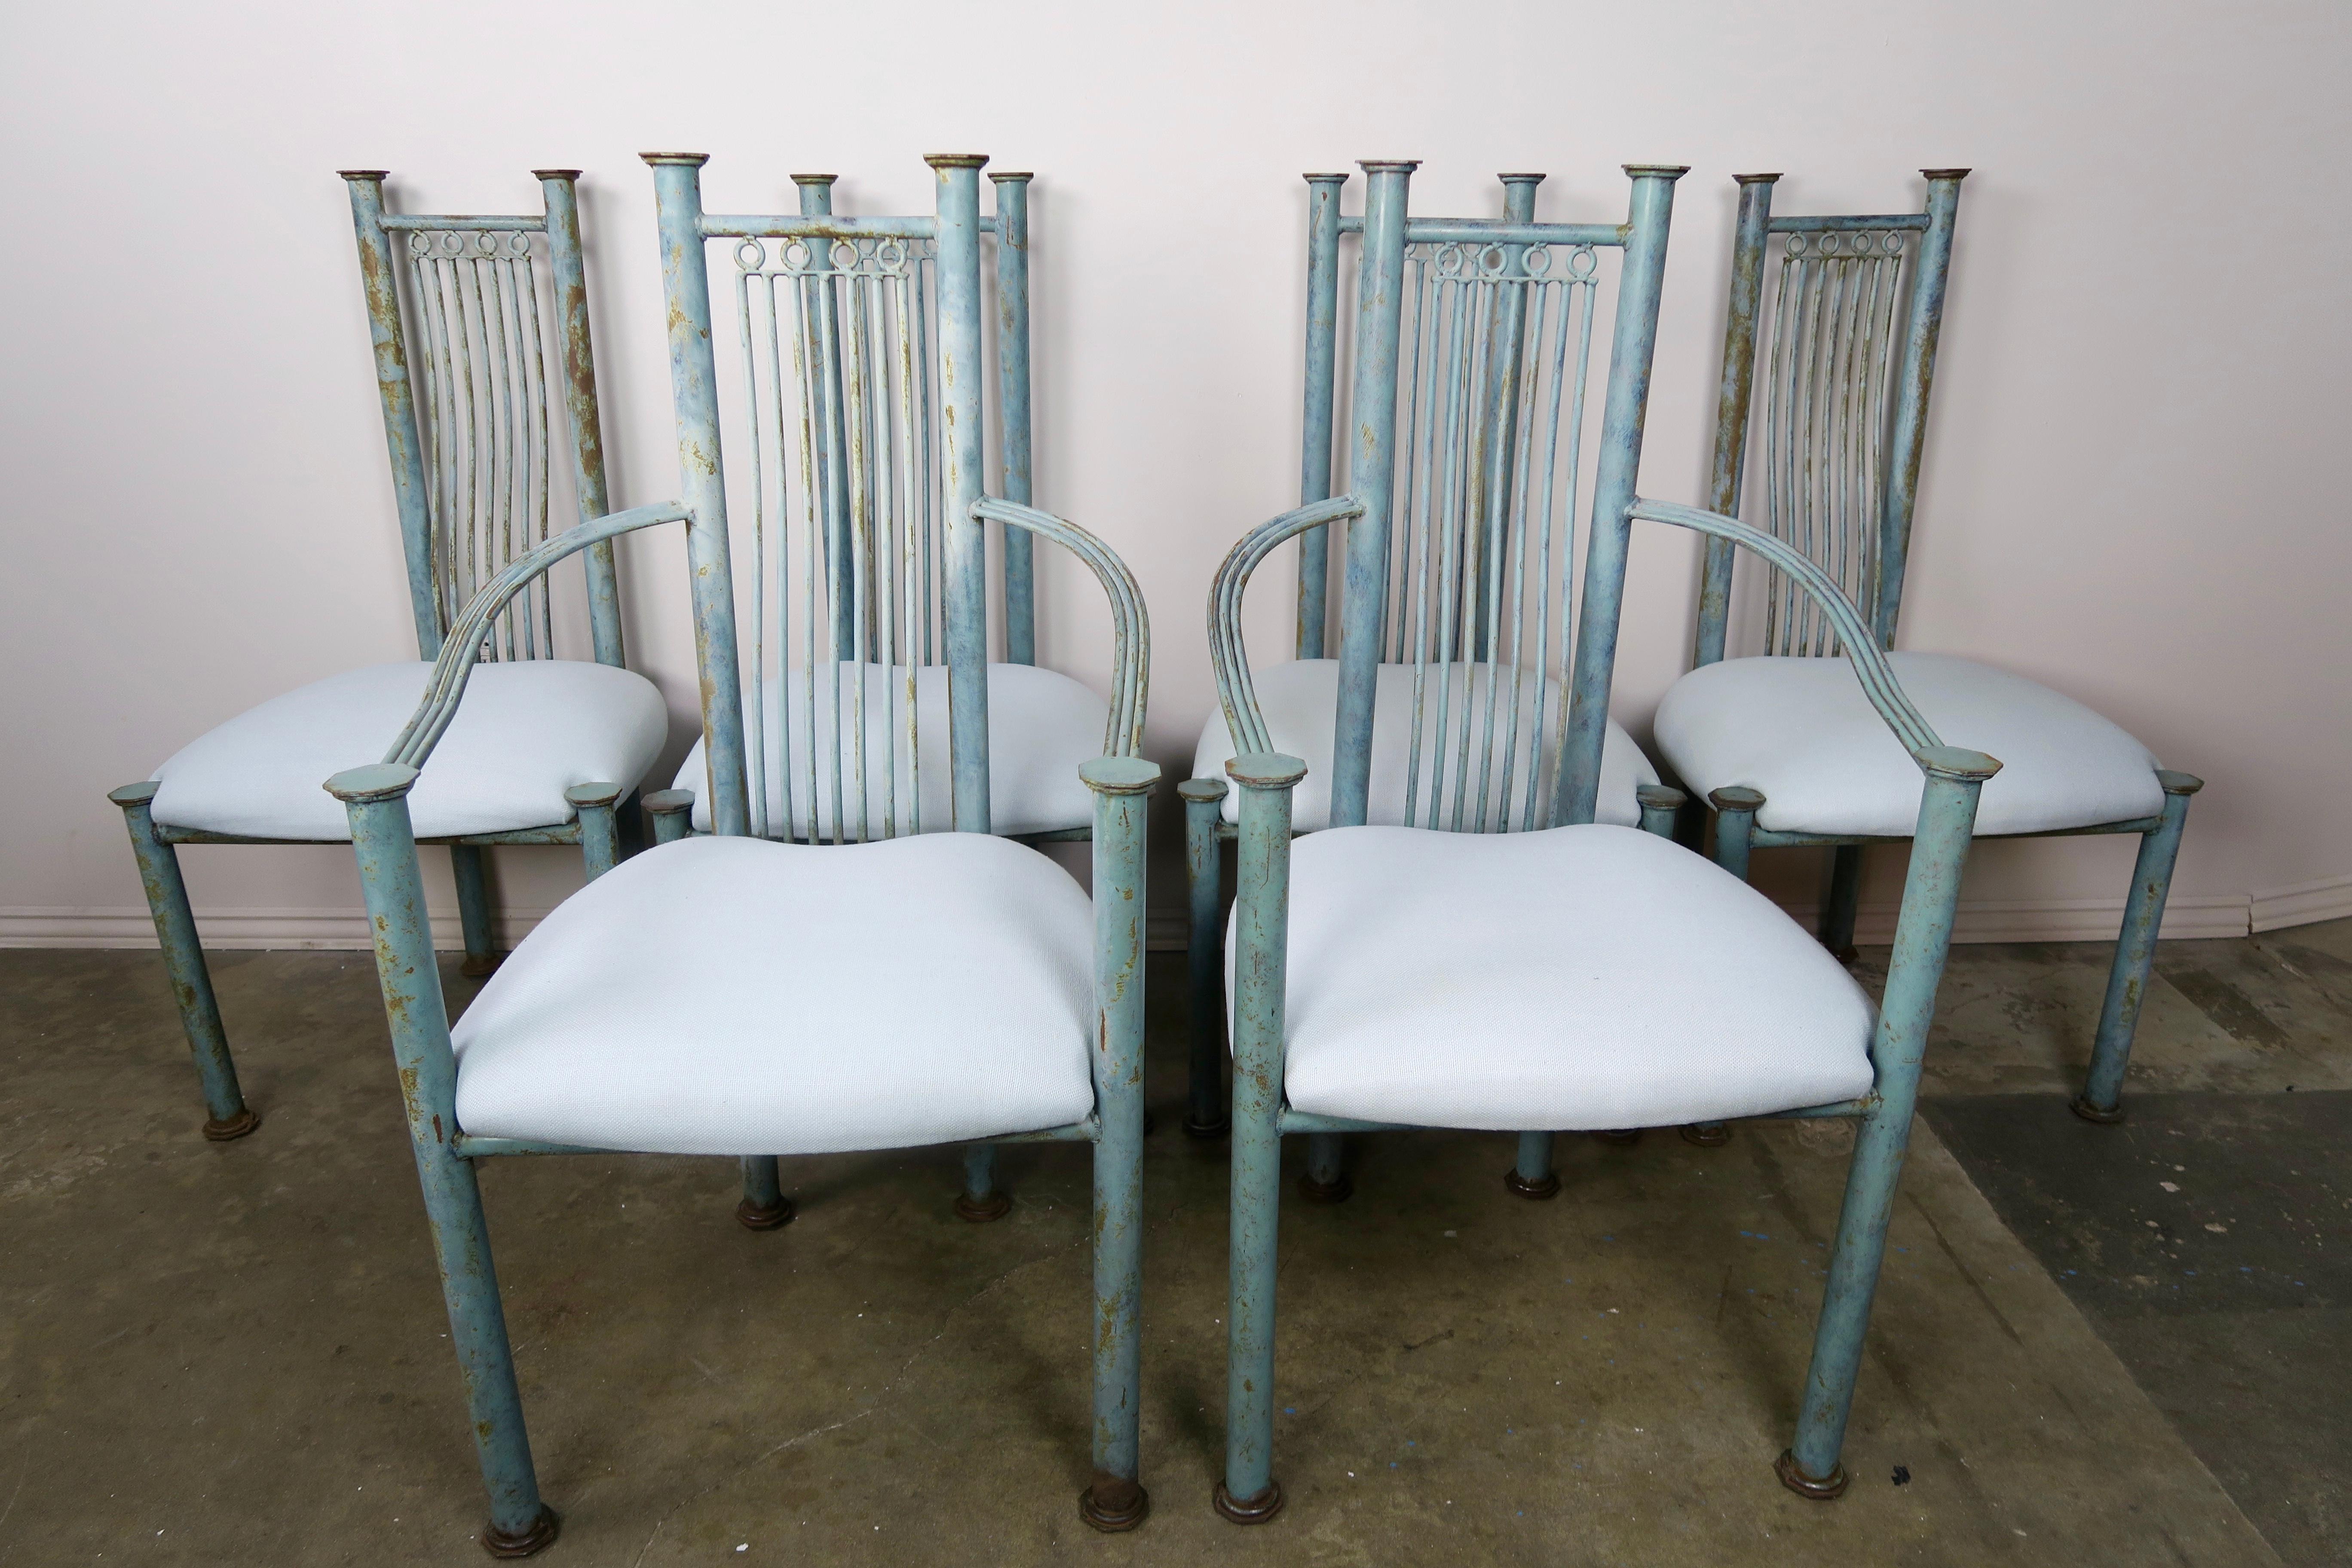 Set of six Italian dining chairs, (2) armchairs & (4) side chairs from the mid-20th century. The chairs are painted in a soft robin's egg blue with soft brown accents (worn paint). The chairs are newly upholstered in a soft blue colored linen that